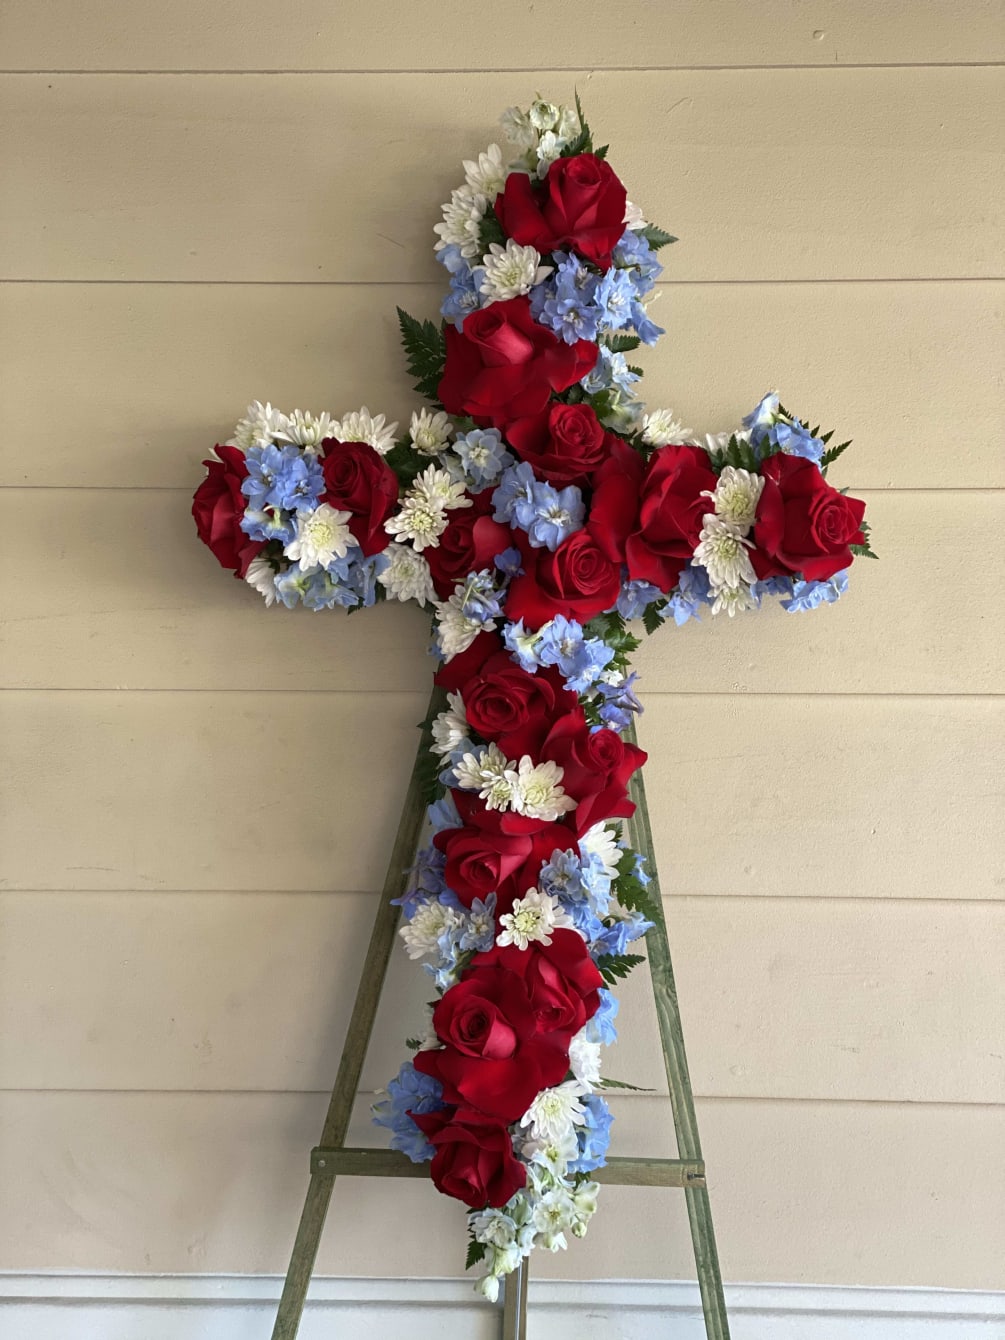 This standing cross is a fine tribute for any patriot, showing red